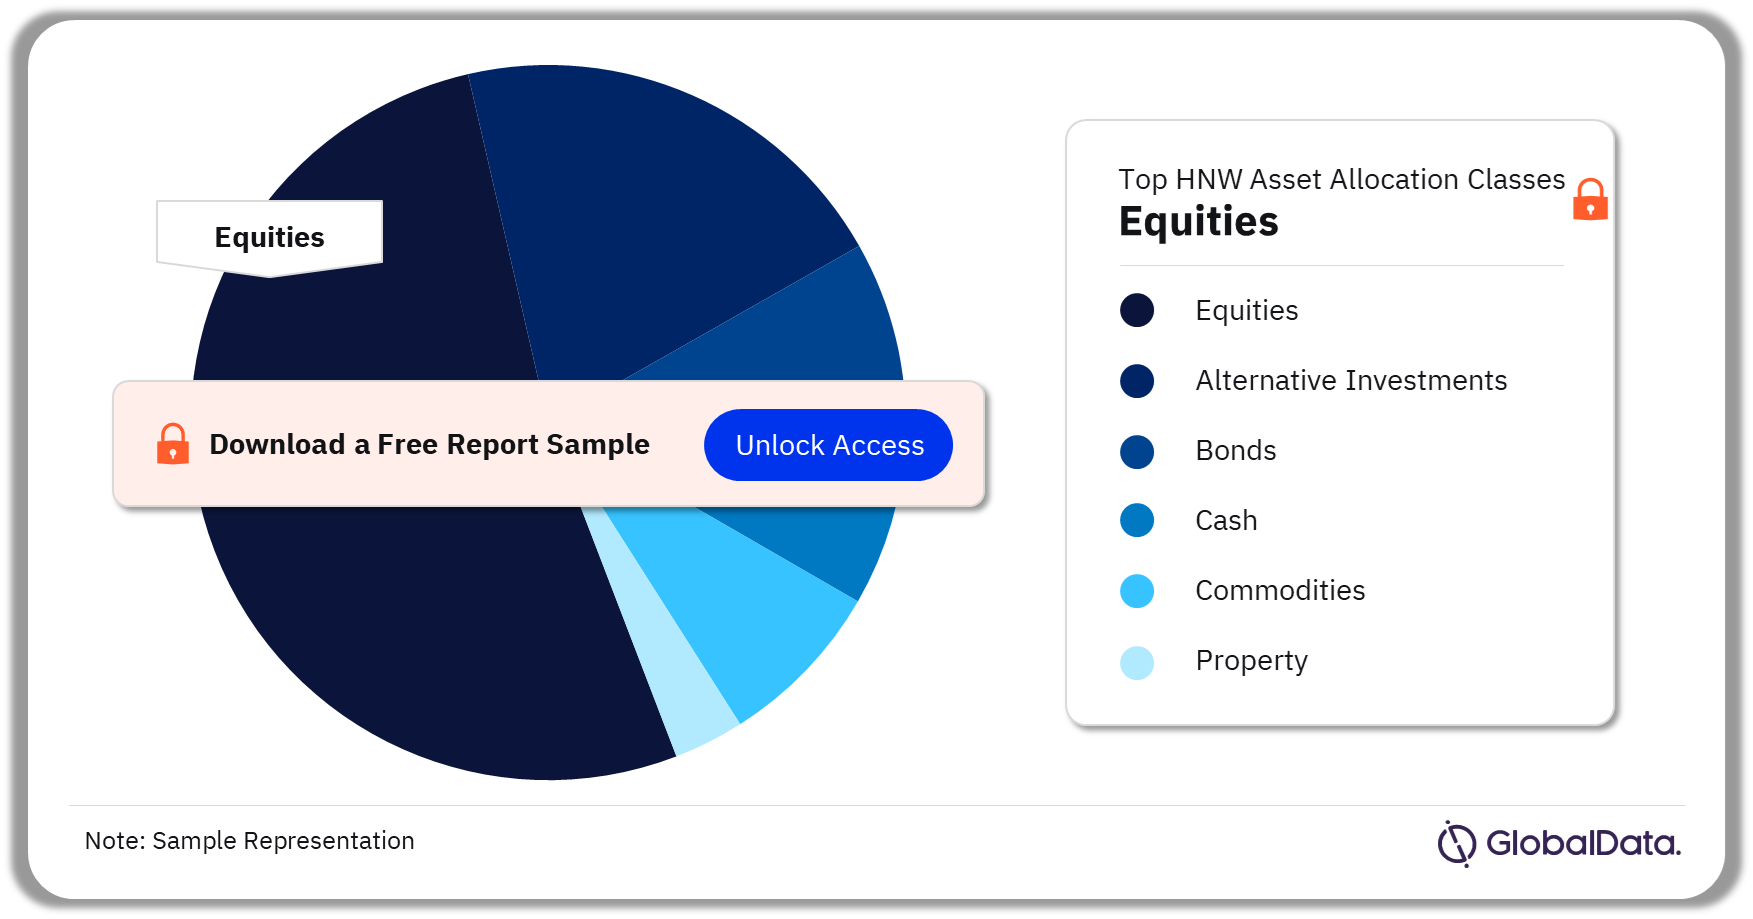 China Wealth Management Market Analysis by HNW Asset Allocation Classes, 2022 (%)